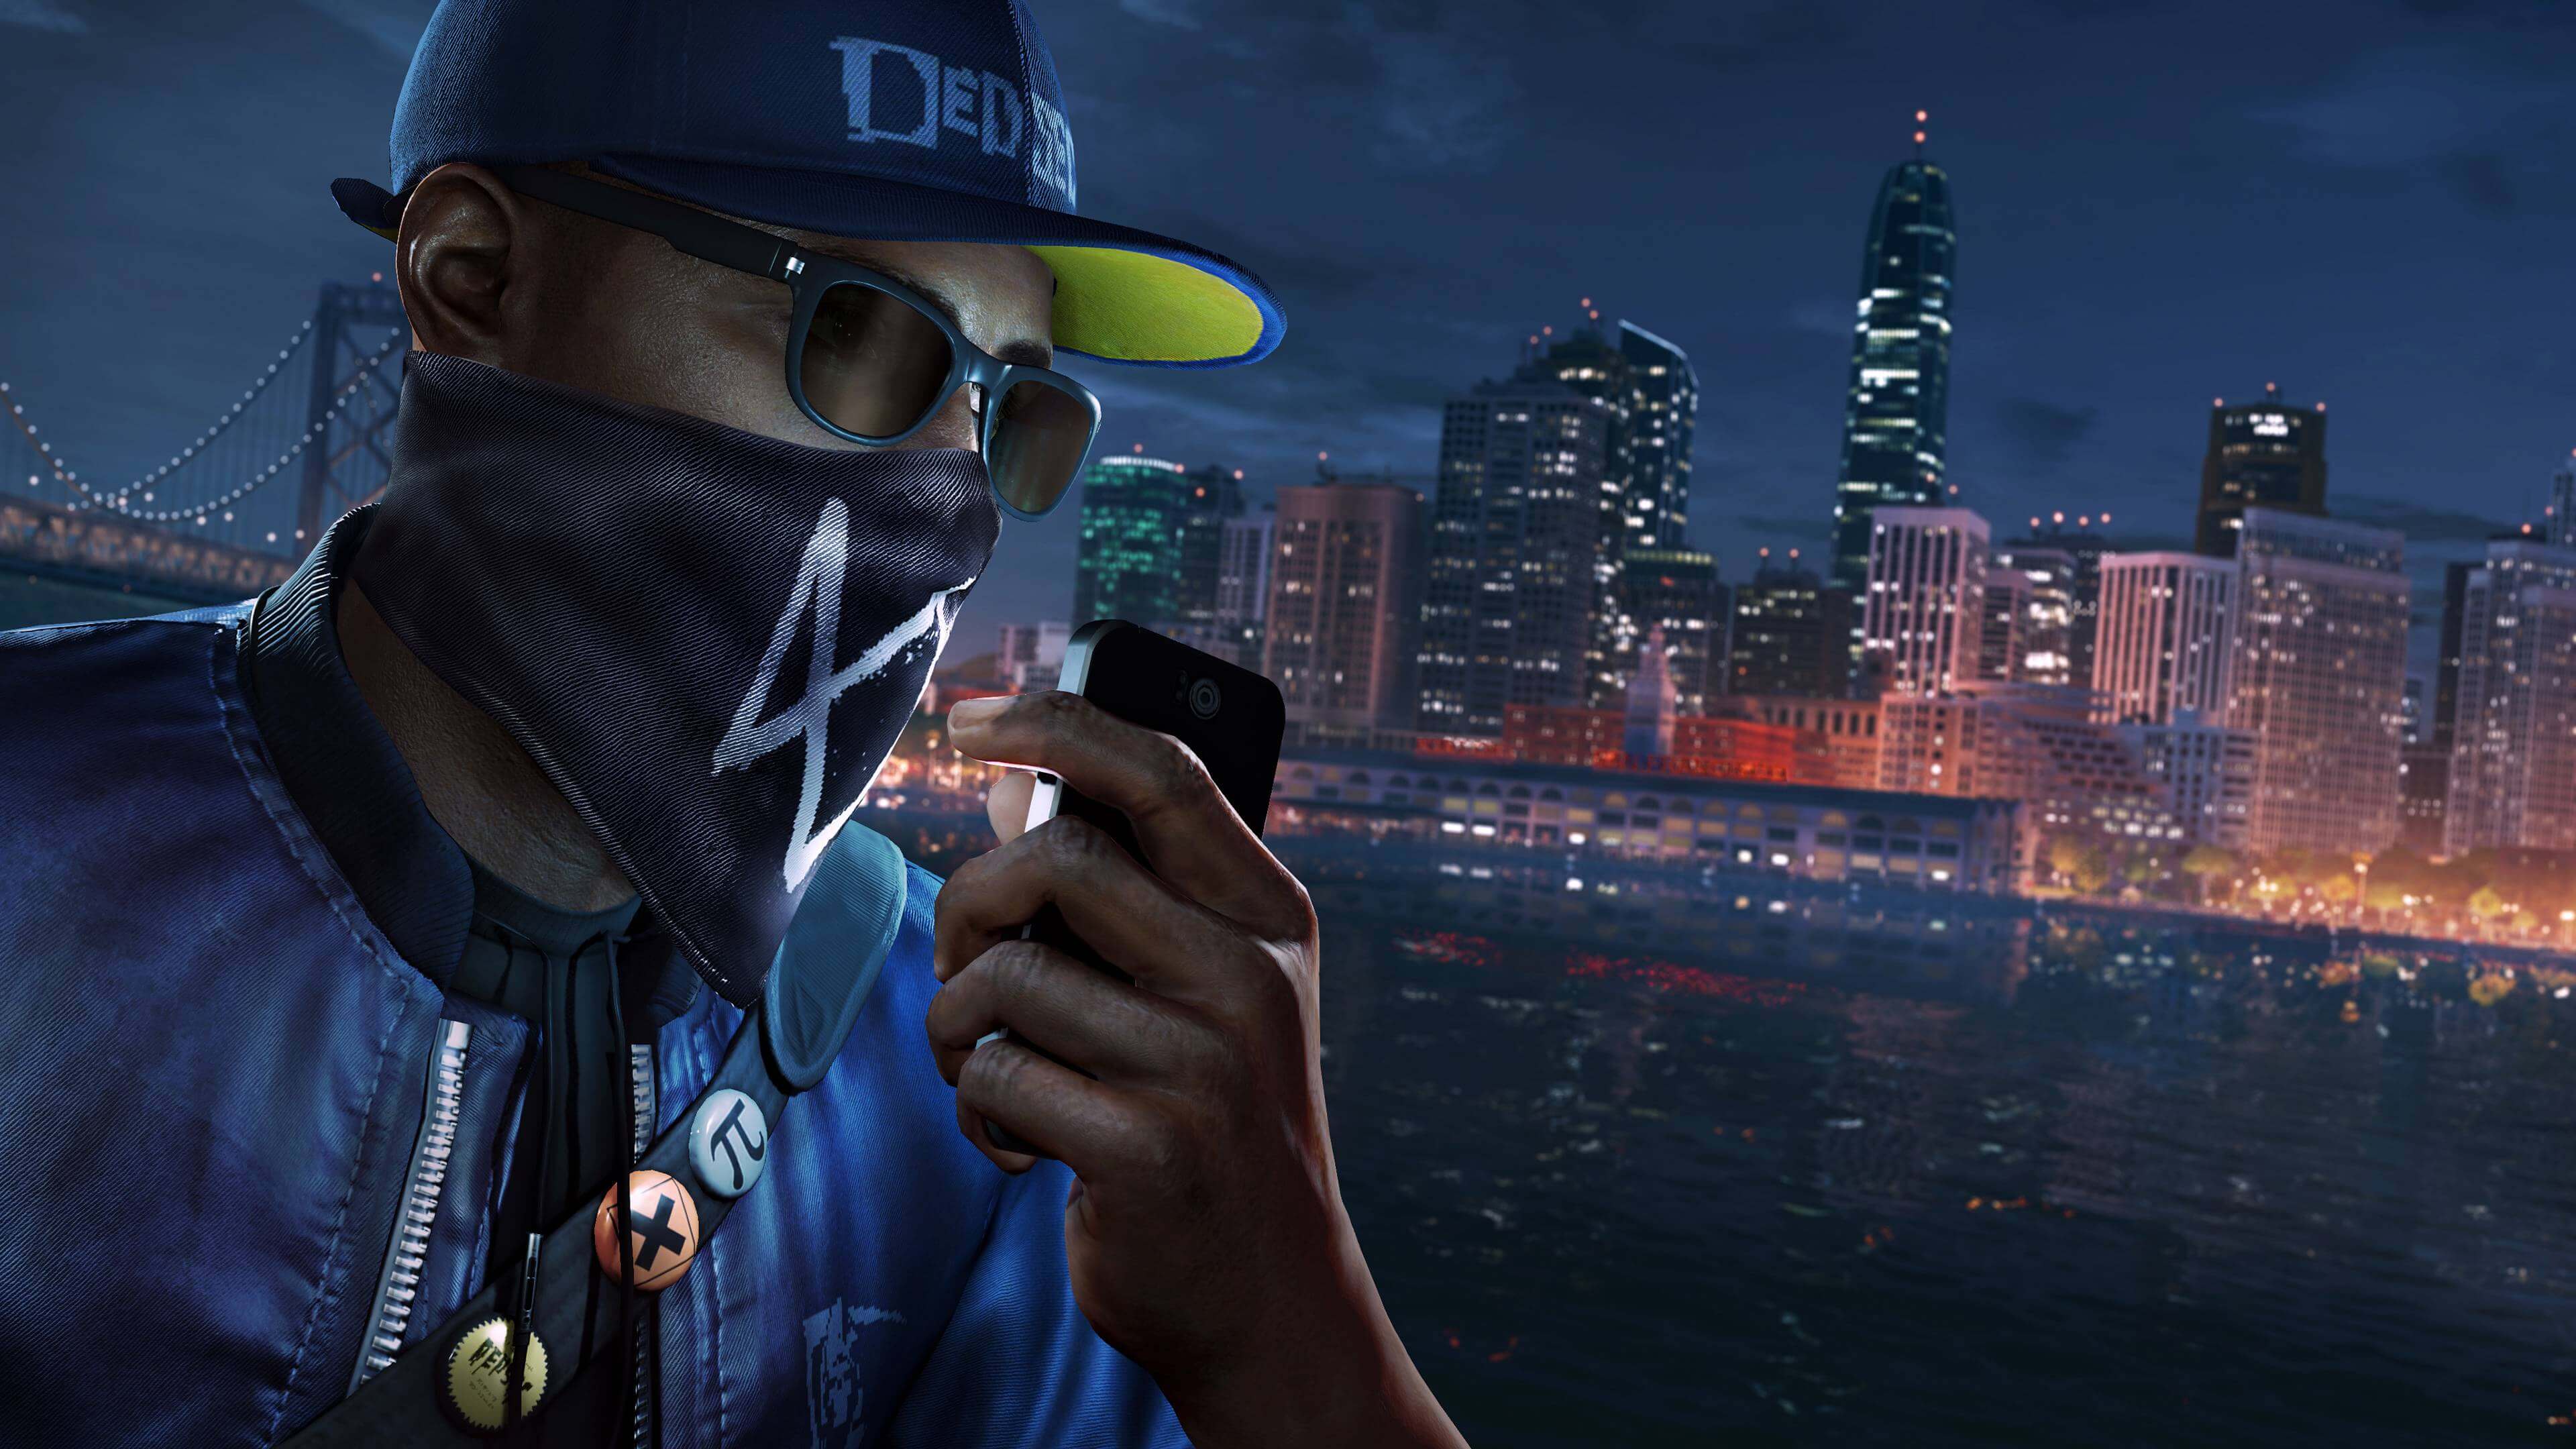 watch dogs 2 download game ps4